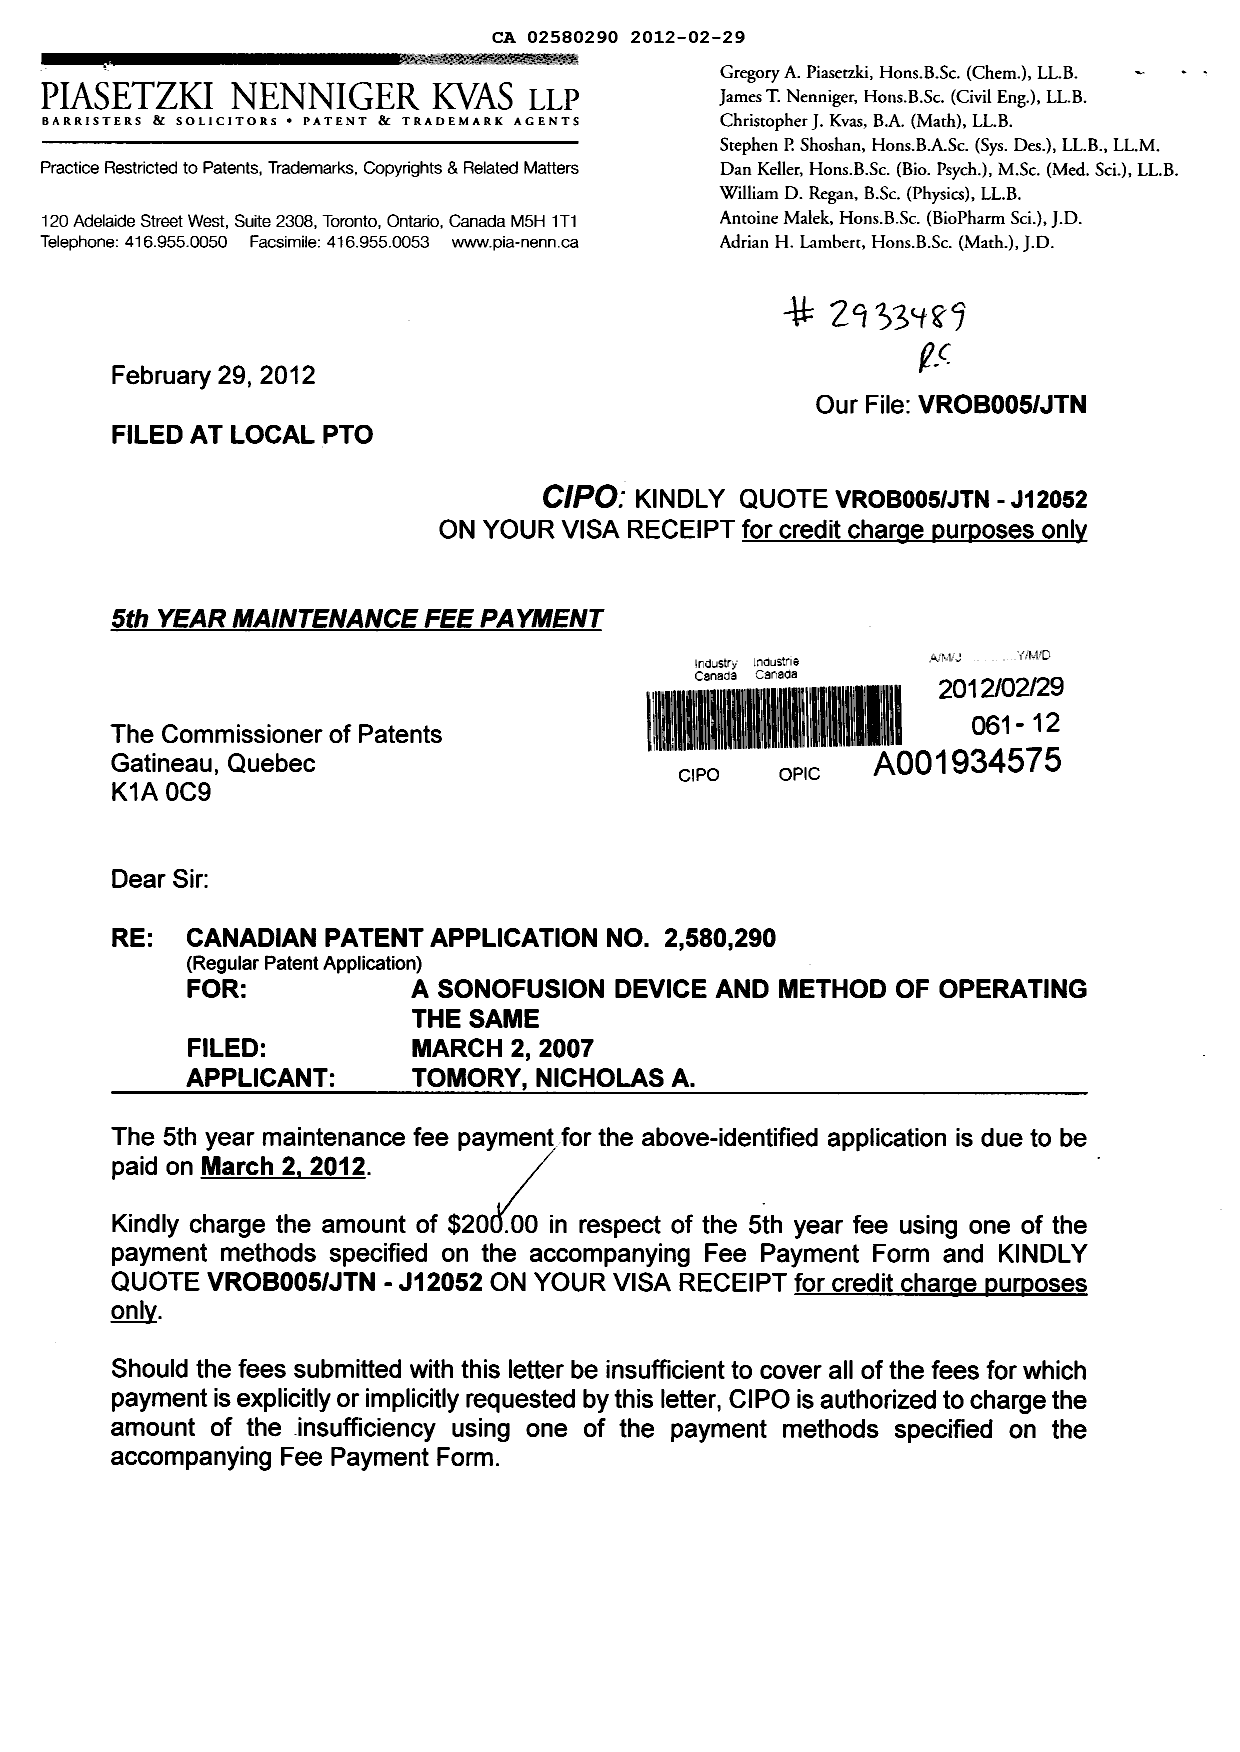 Canadian Patent Document 2580290. Fees 20120229. Image 1 of 2